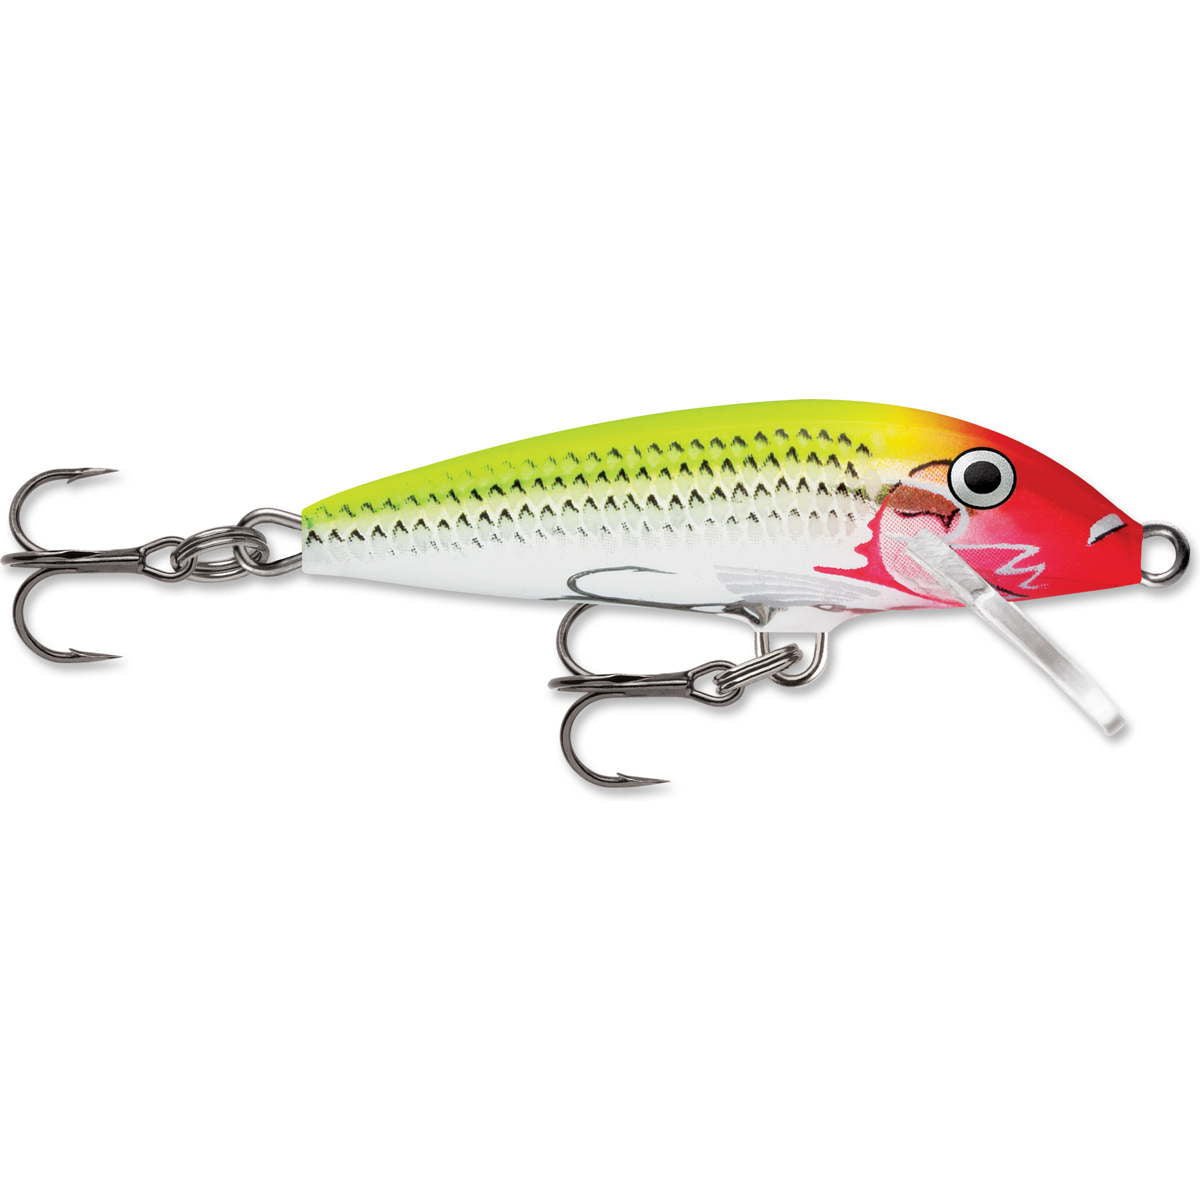 Photo of Rapala Original Floating Lure - Small for sale at United Tackle Shops.